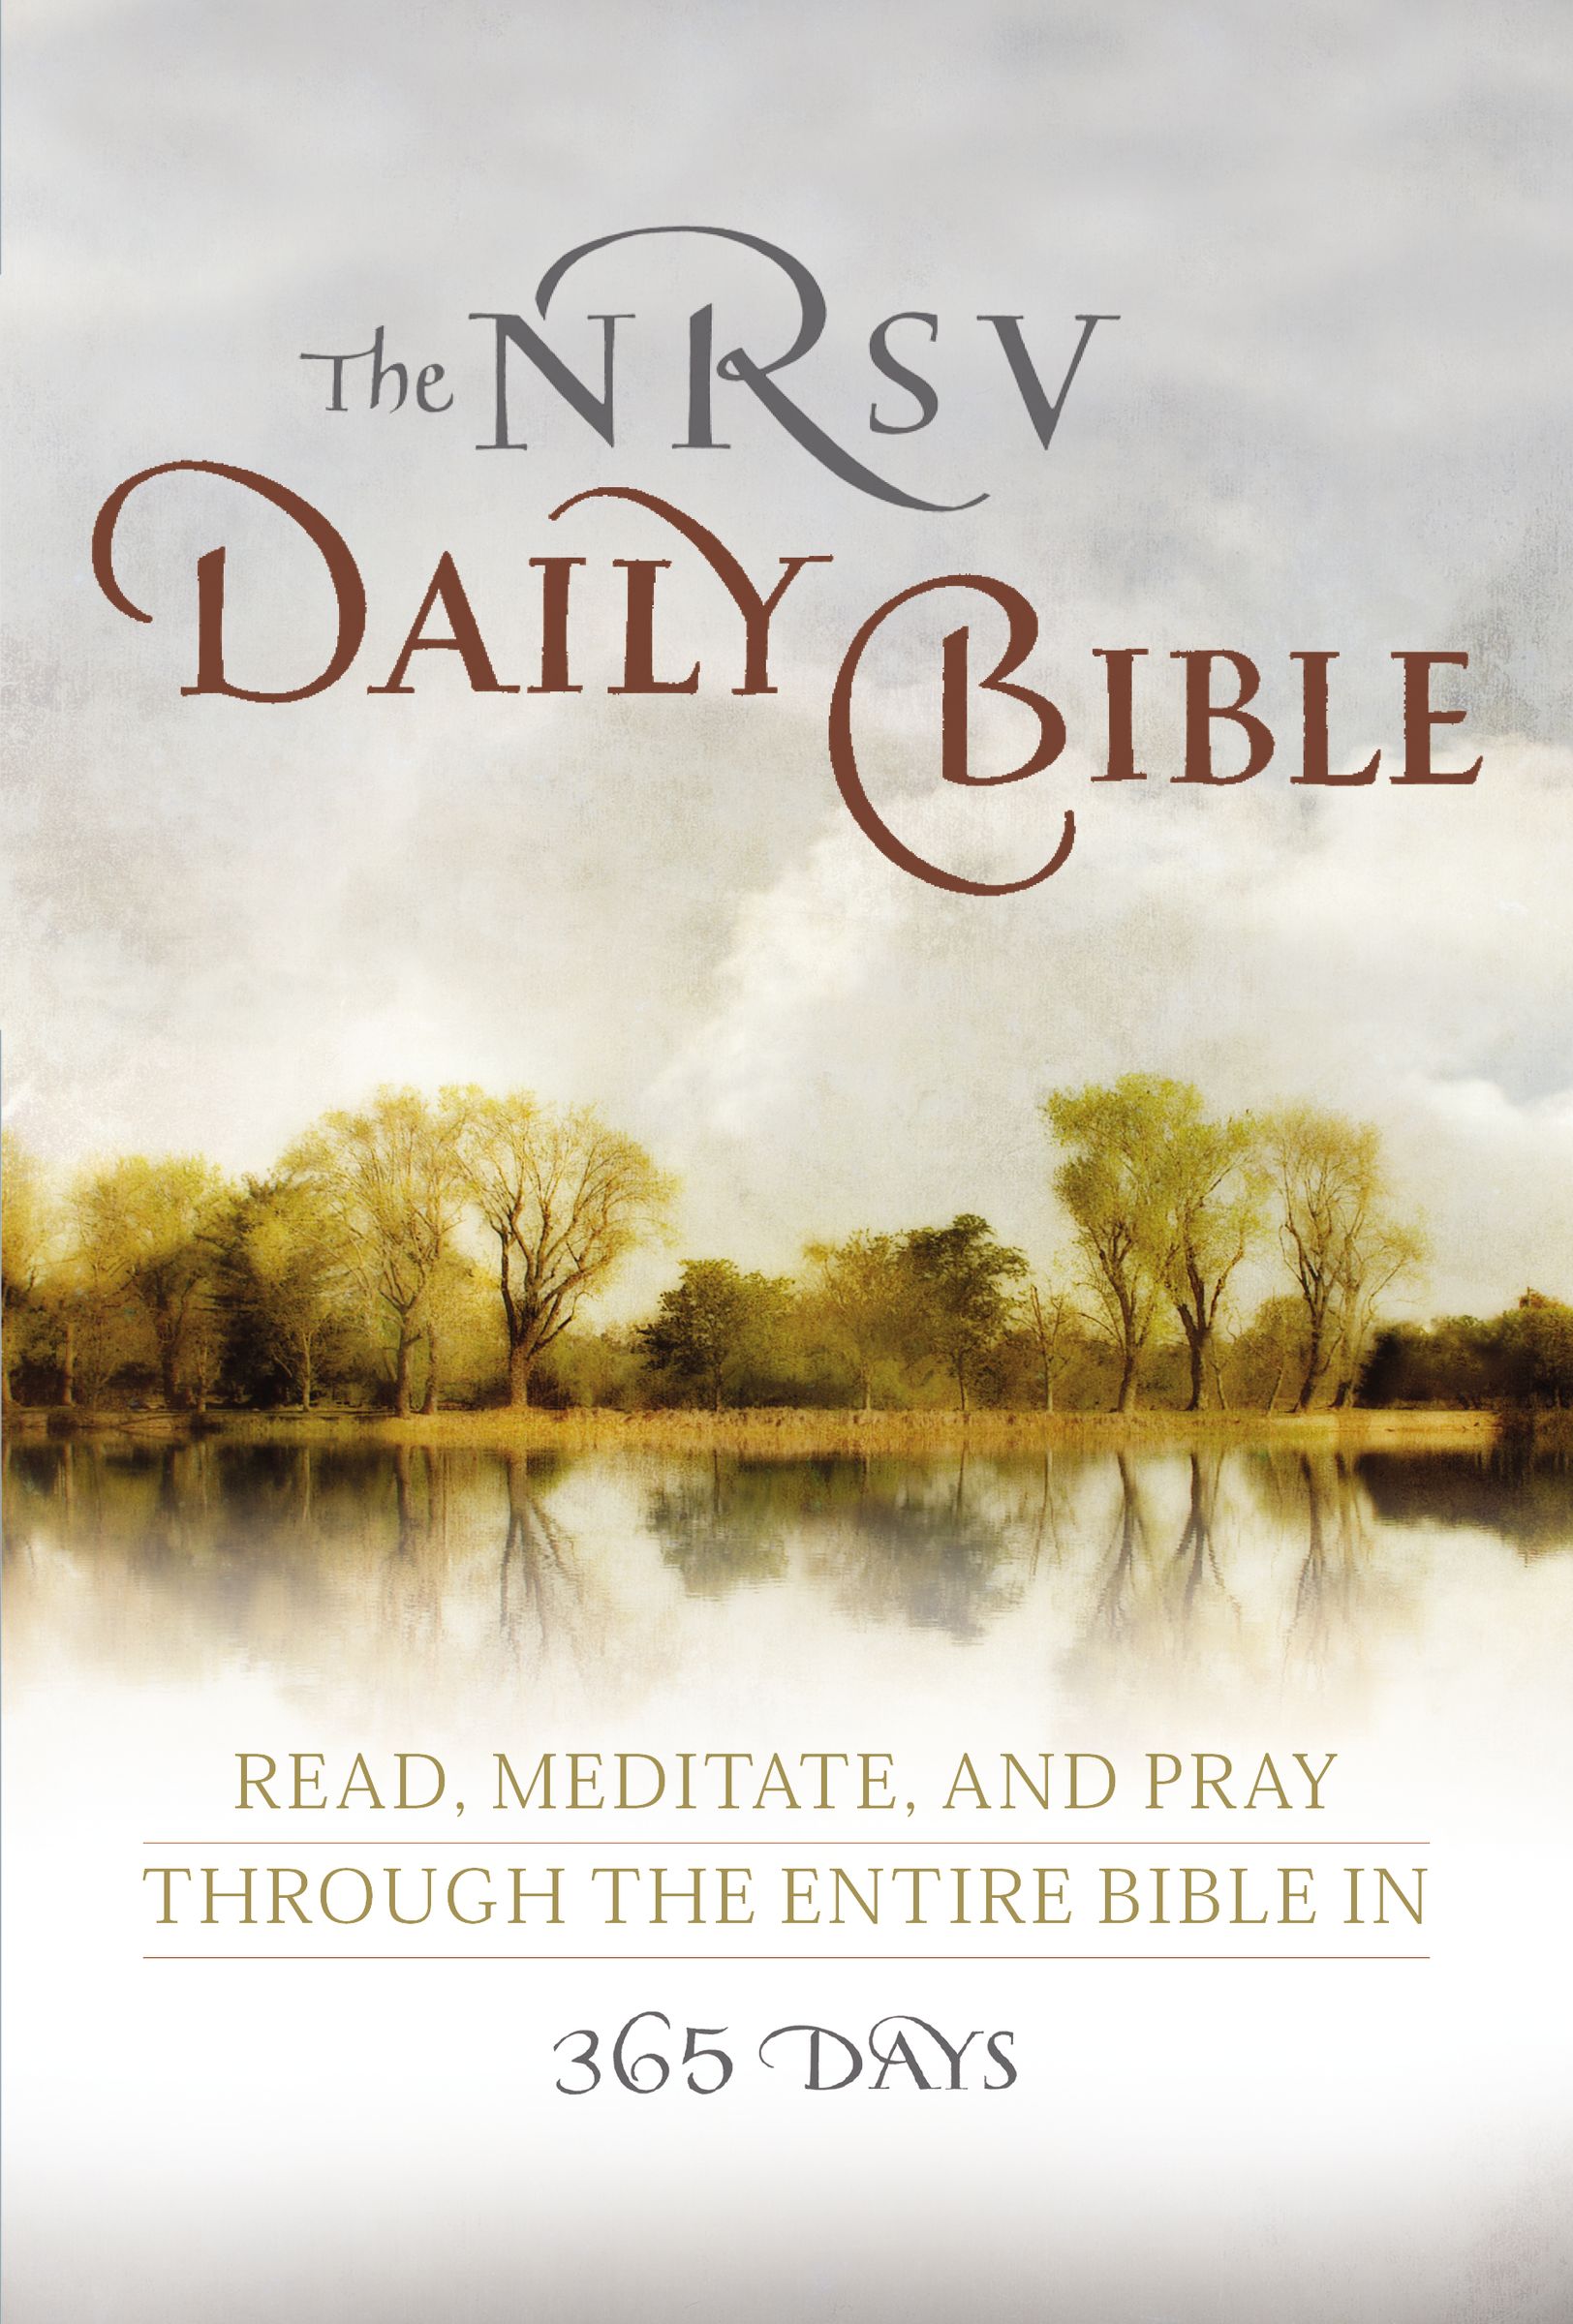 NRSV Daily Bible White Paperback One-Year Reading Plan Devotional